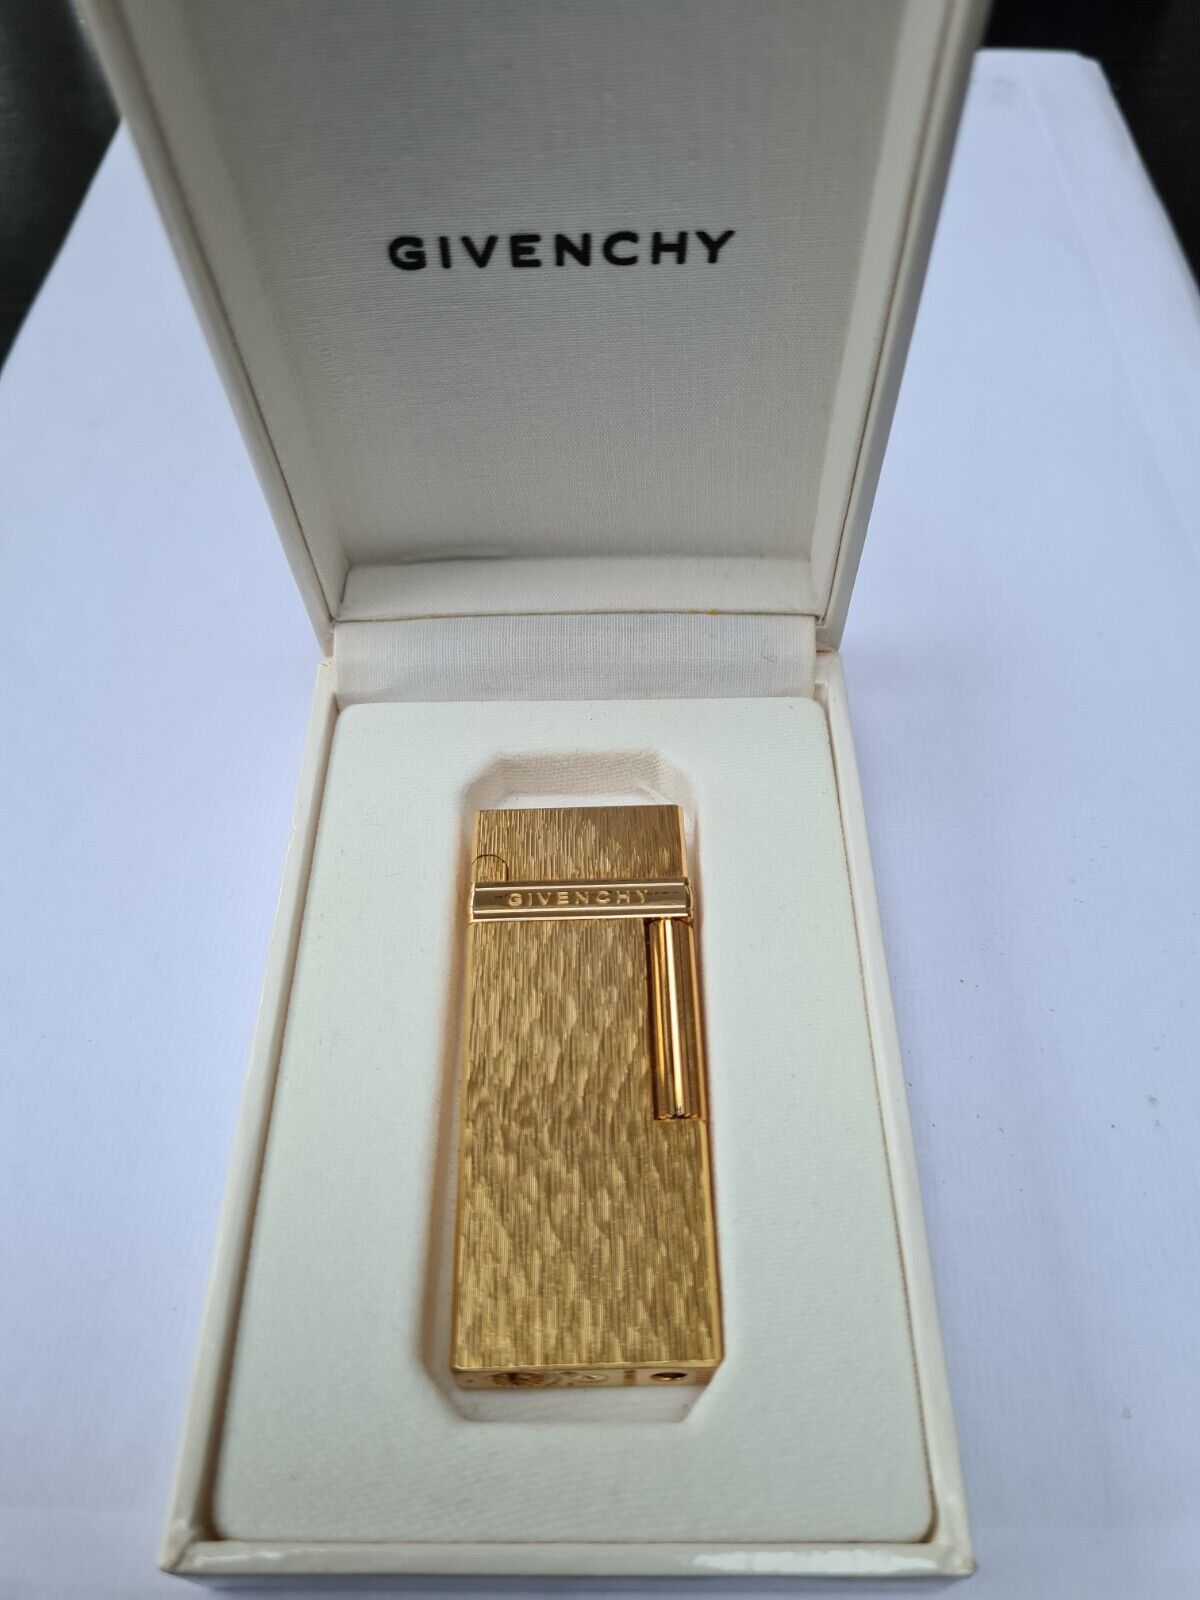 🌟🌟🌟 Givenchy Luxury Lighter (Rare) - Own a Piece of History 🌟🌟🌟